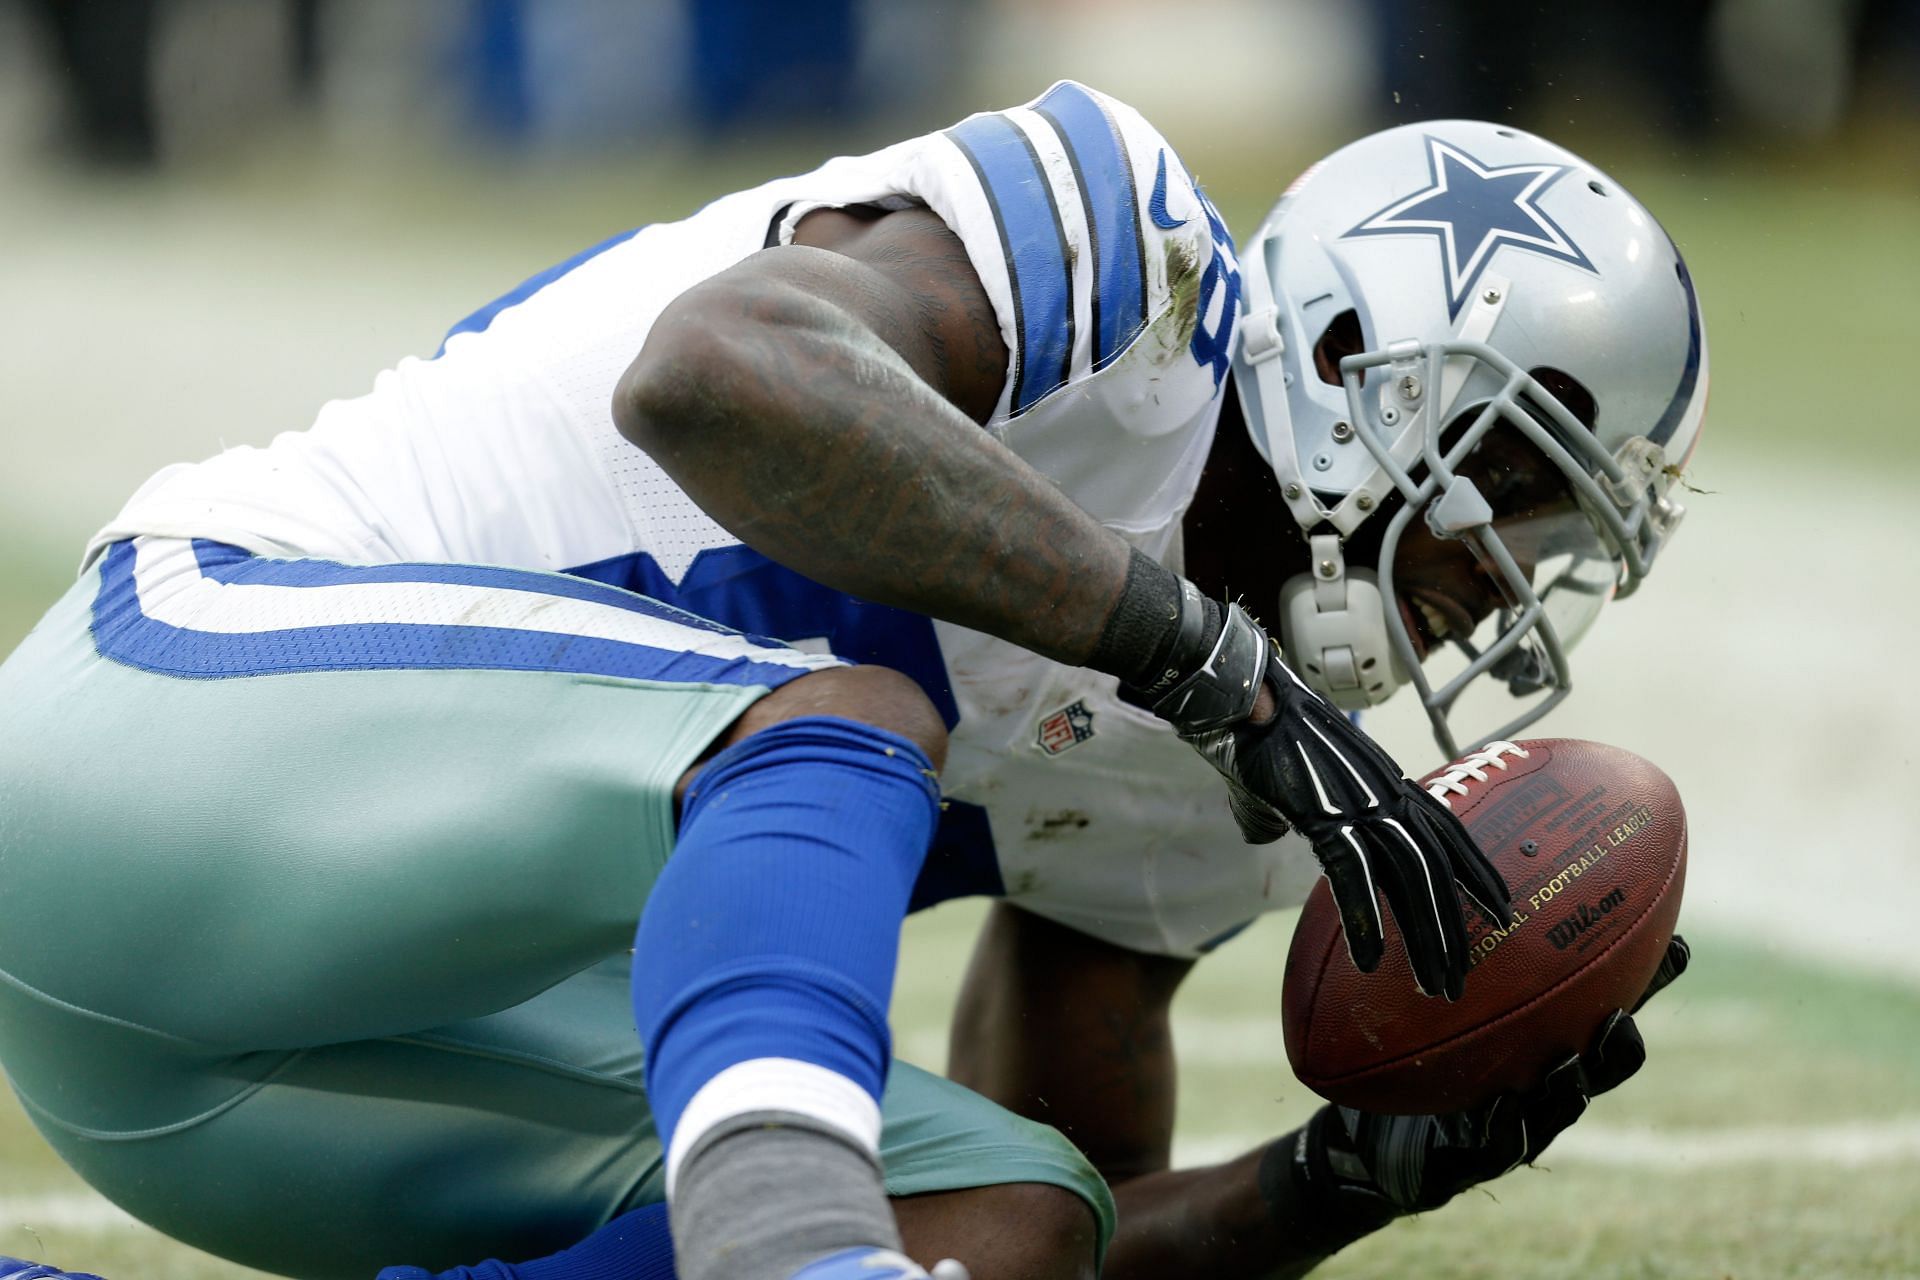 Dez Bryant has himself been involved in touchdown-related controversy